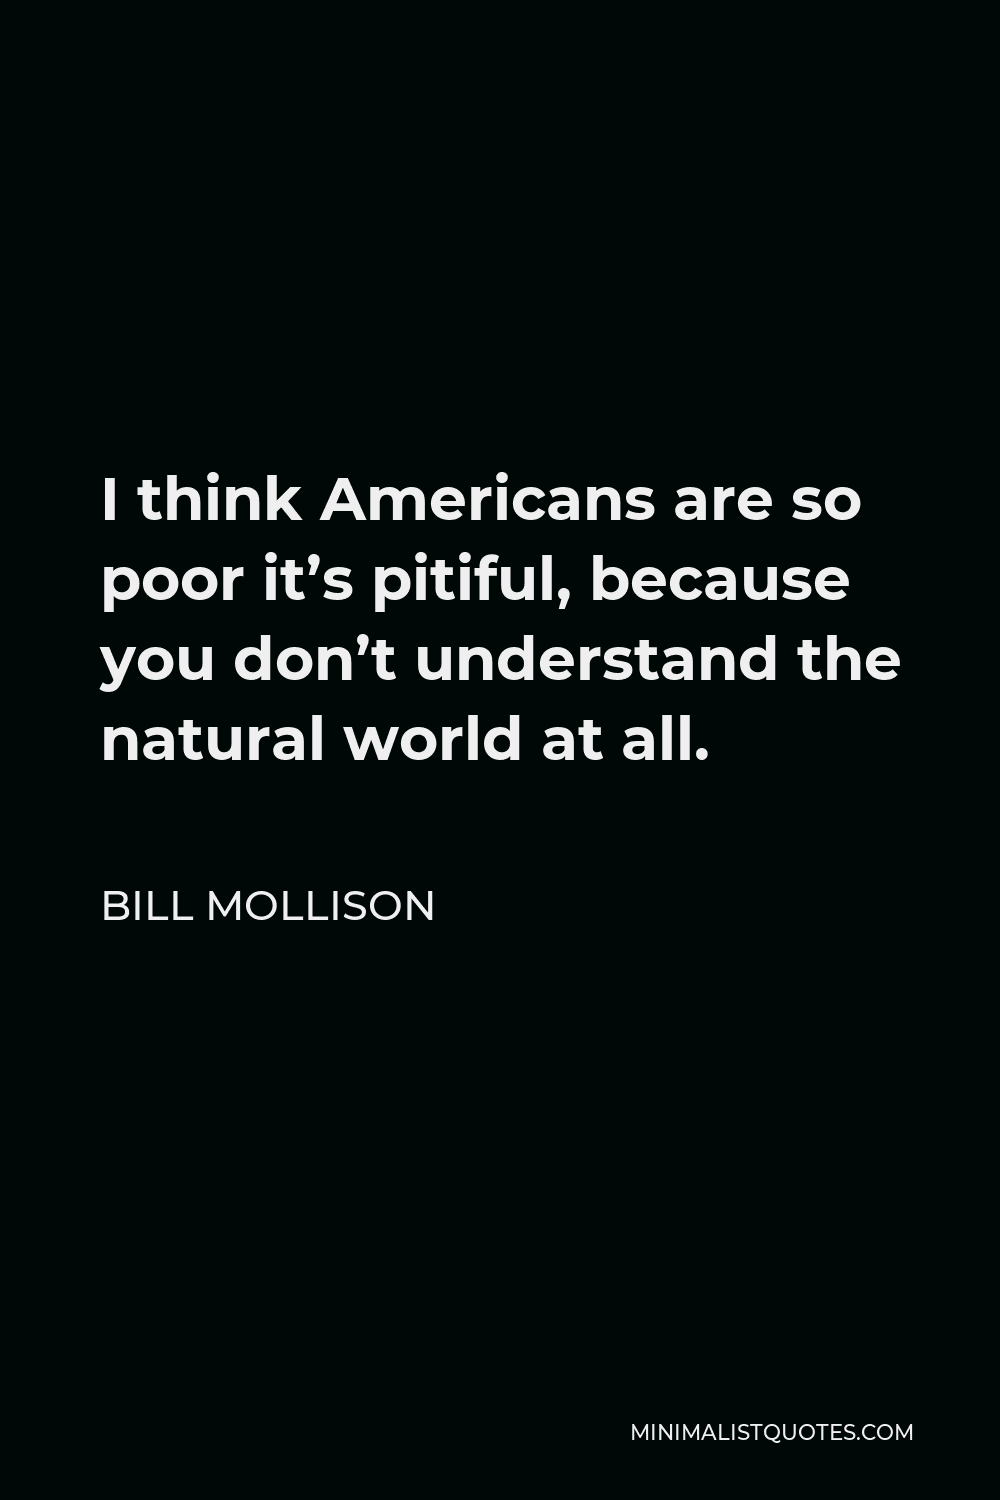 Bill Mollison Quote - I think Americans are so poor it’s pitiful, because you don’t understand the natural world at all.